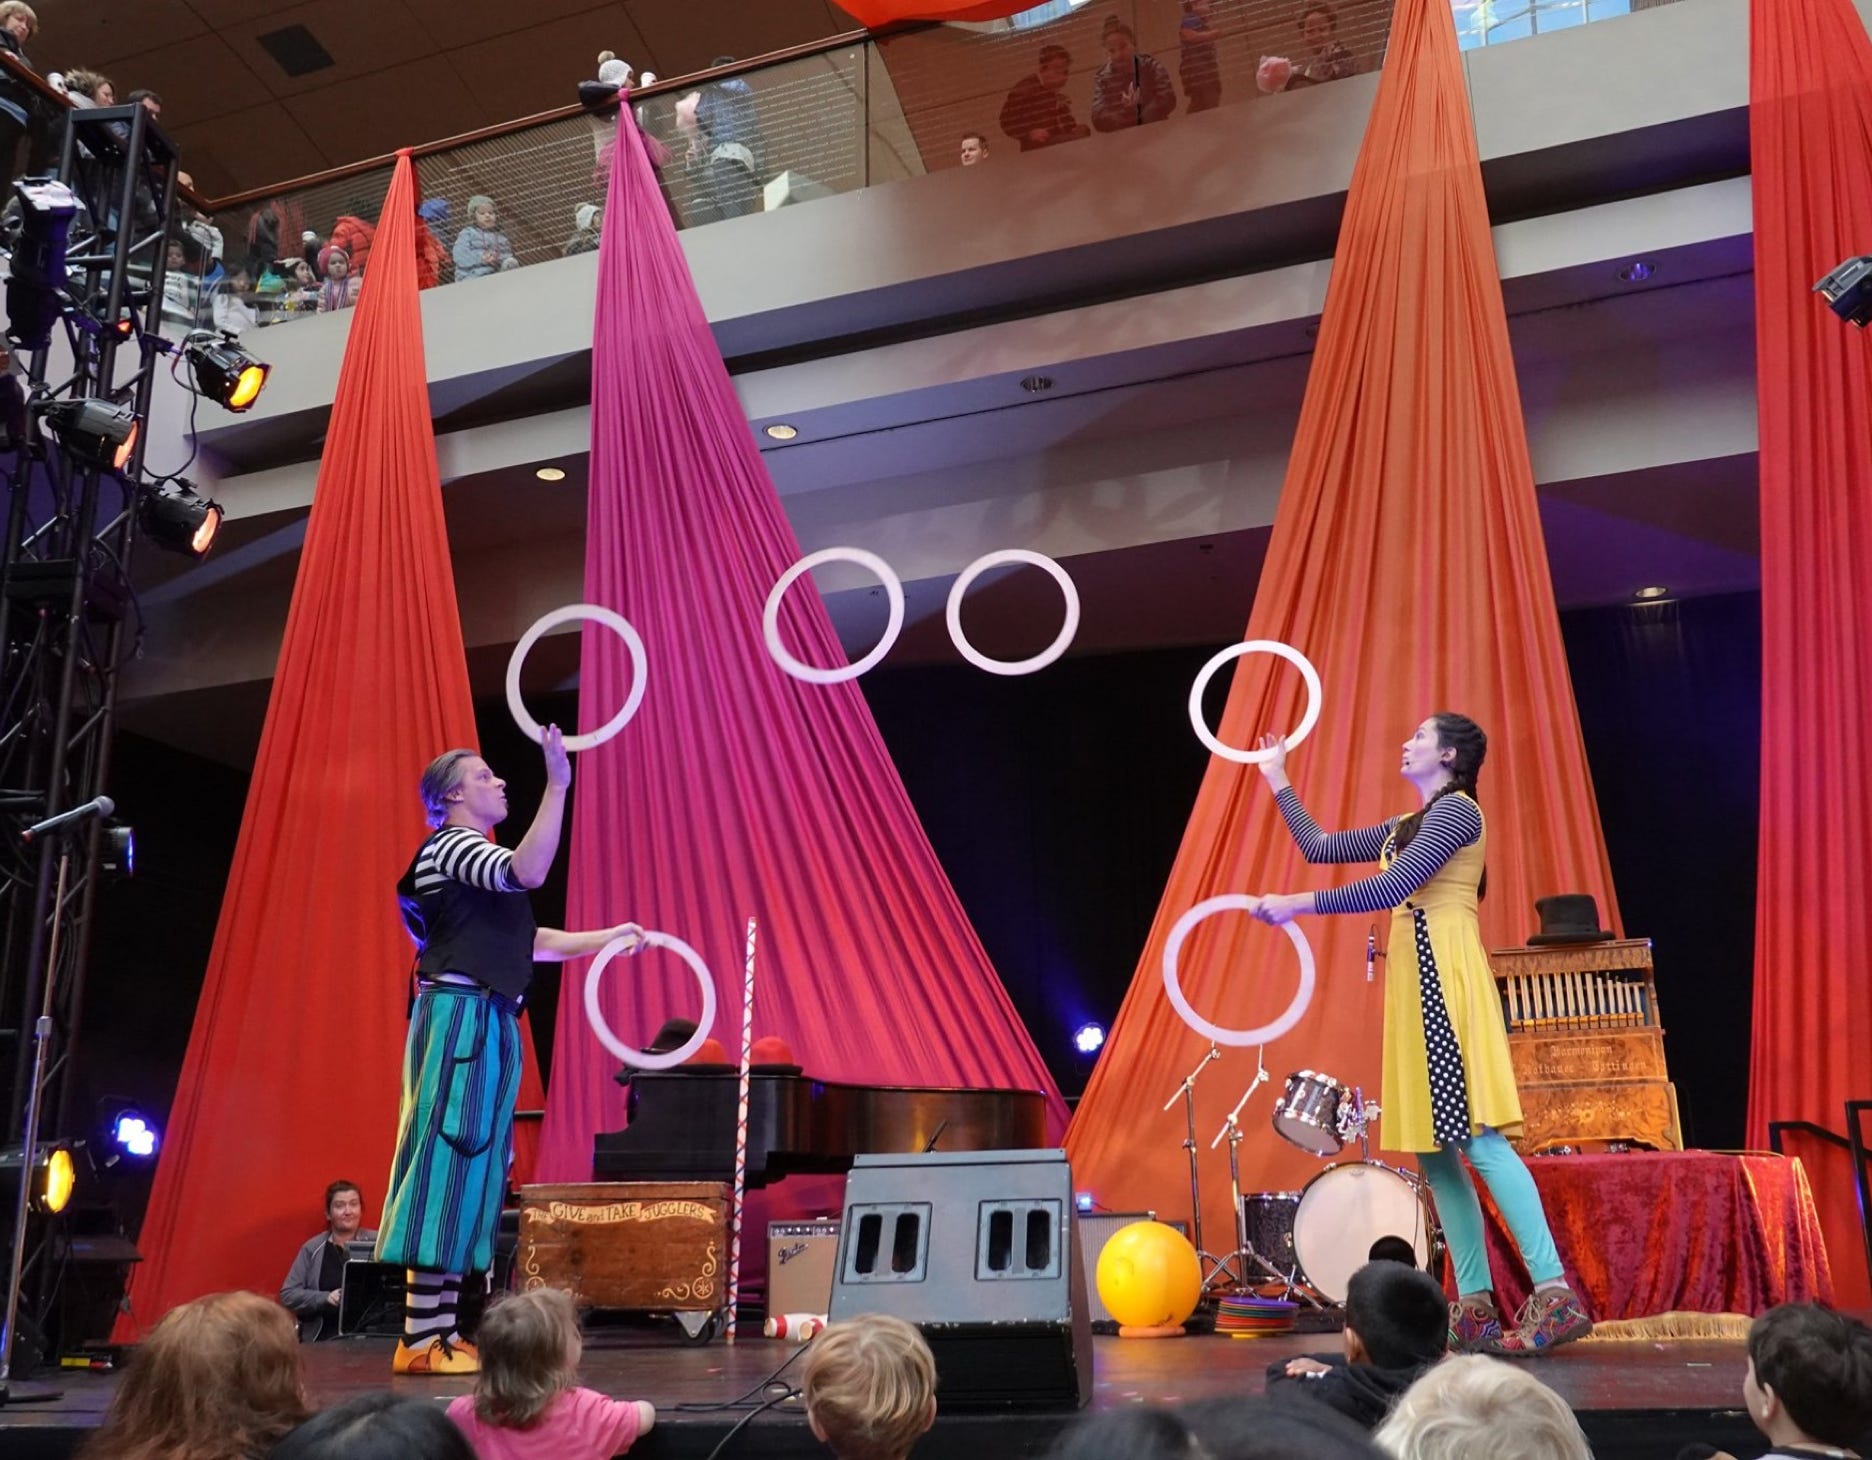 2 jugglers passing 6 rings on a decorated stage